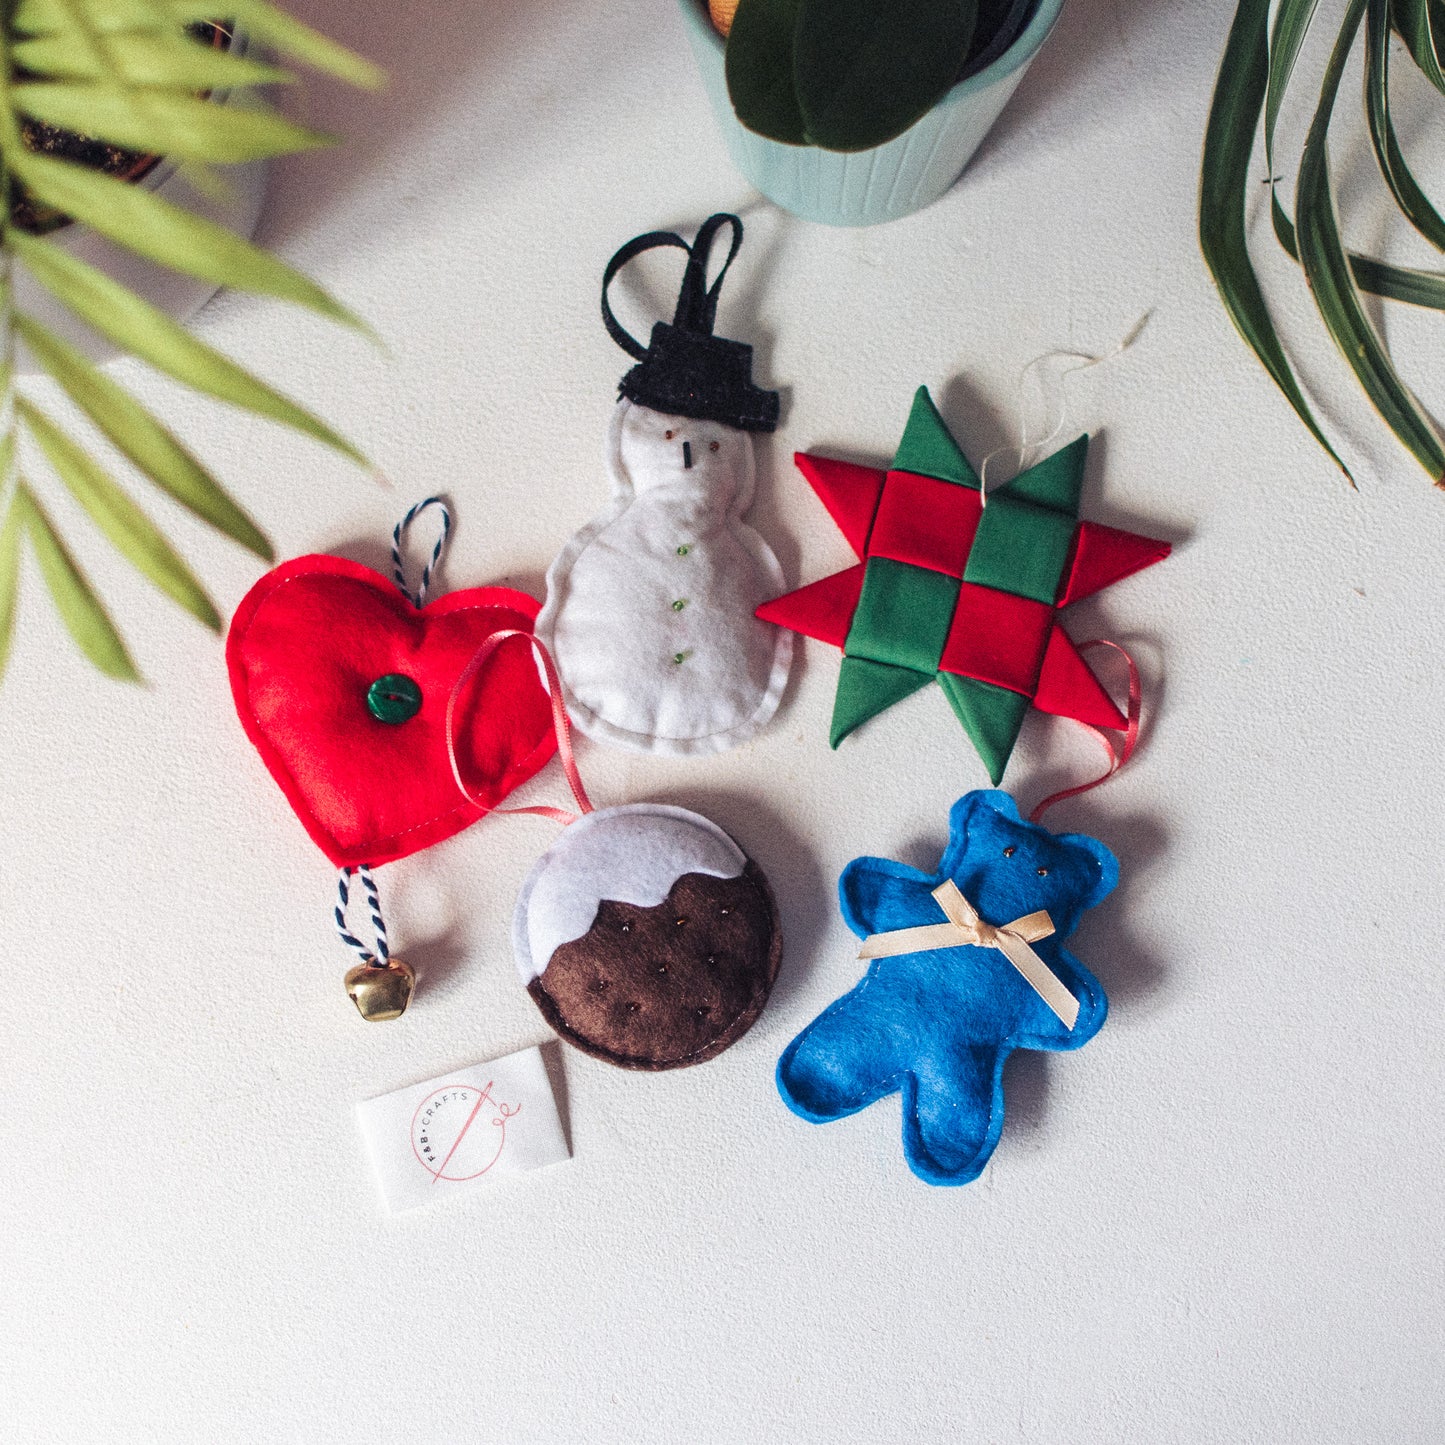 Versatile Holiday Decorations: Assorted felt ornaments for decorating your tree or home, creating a cozy and festive atmosphere.